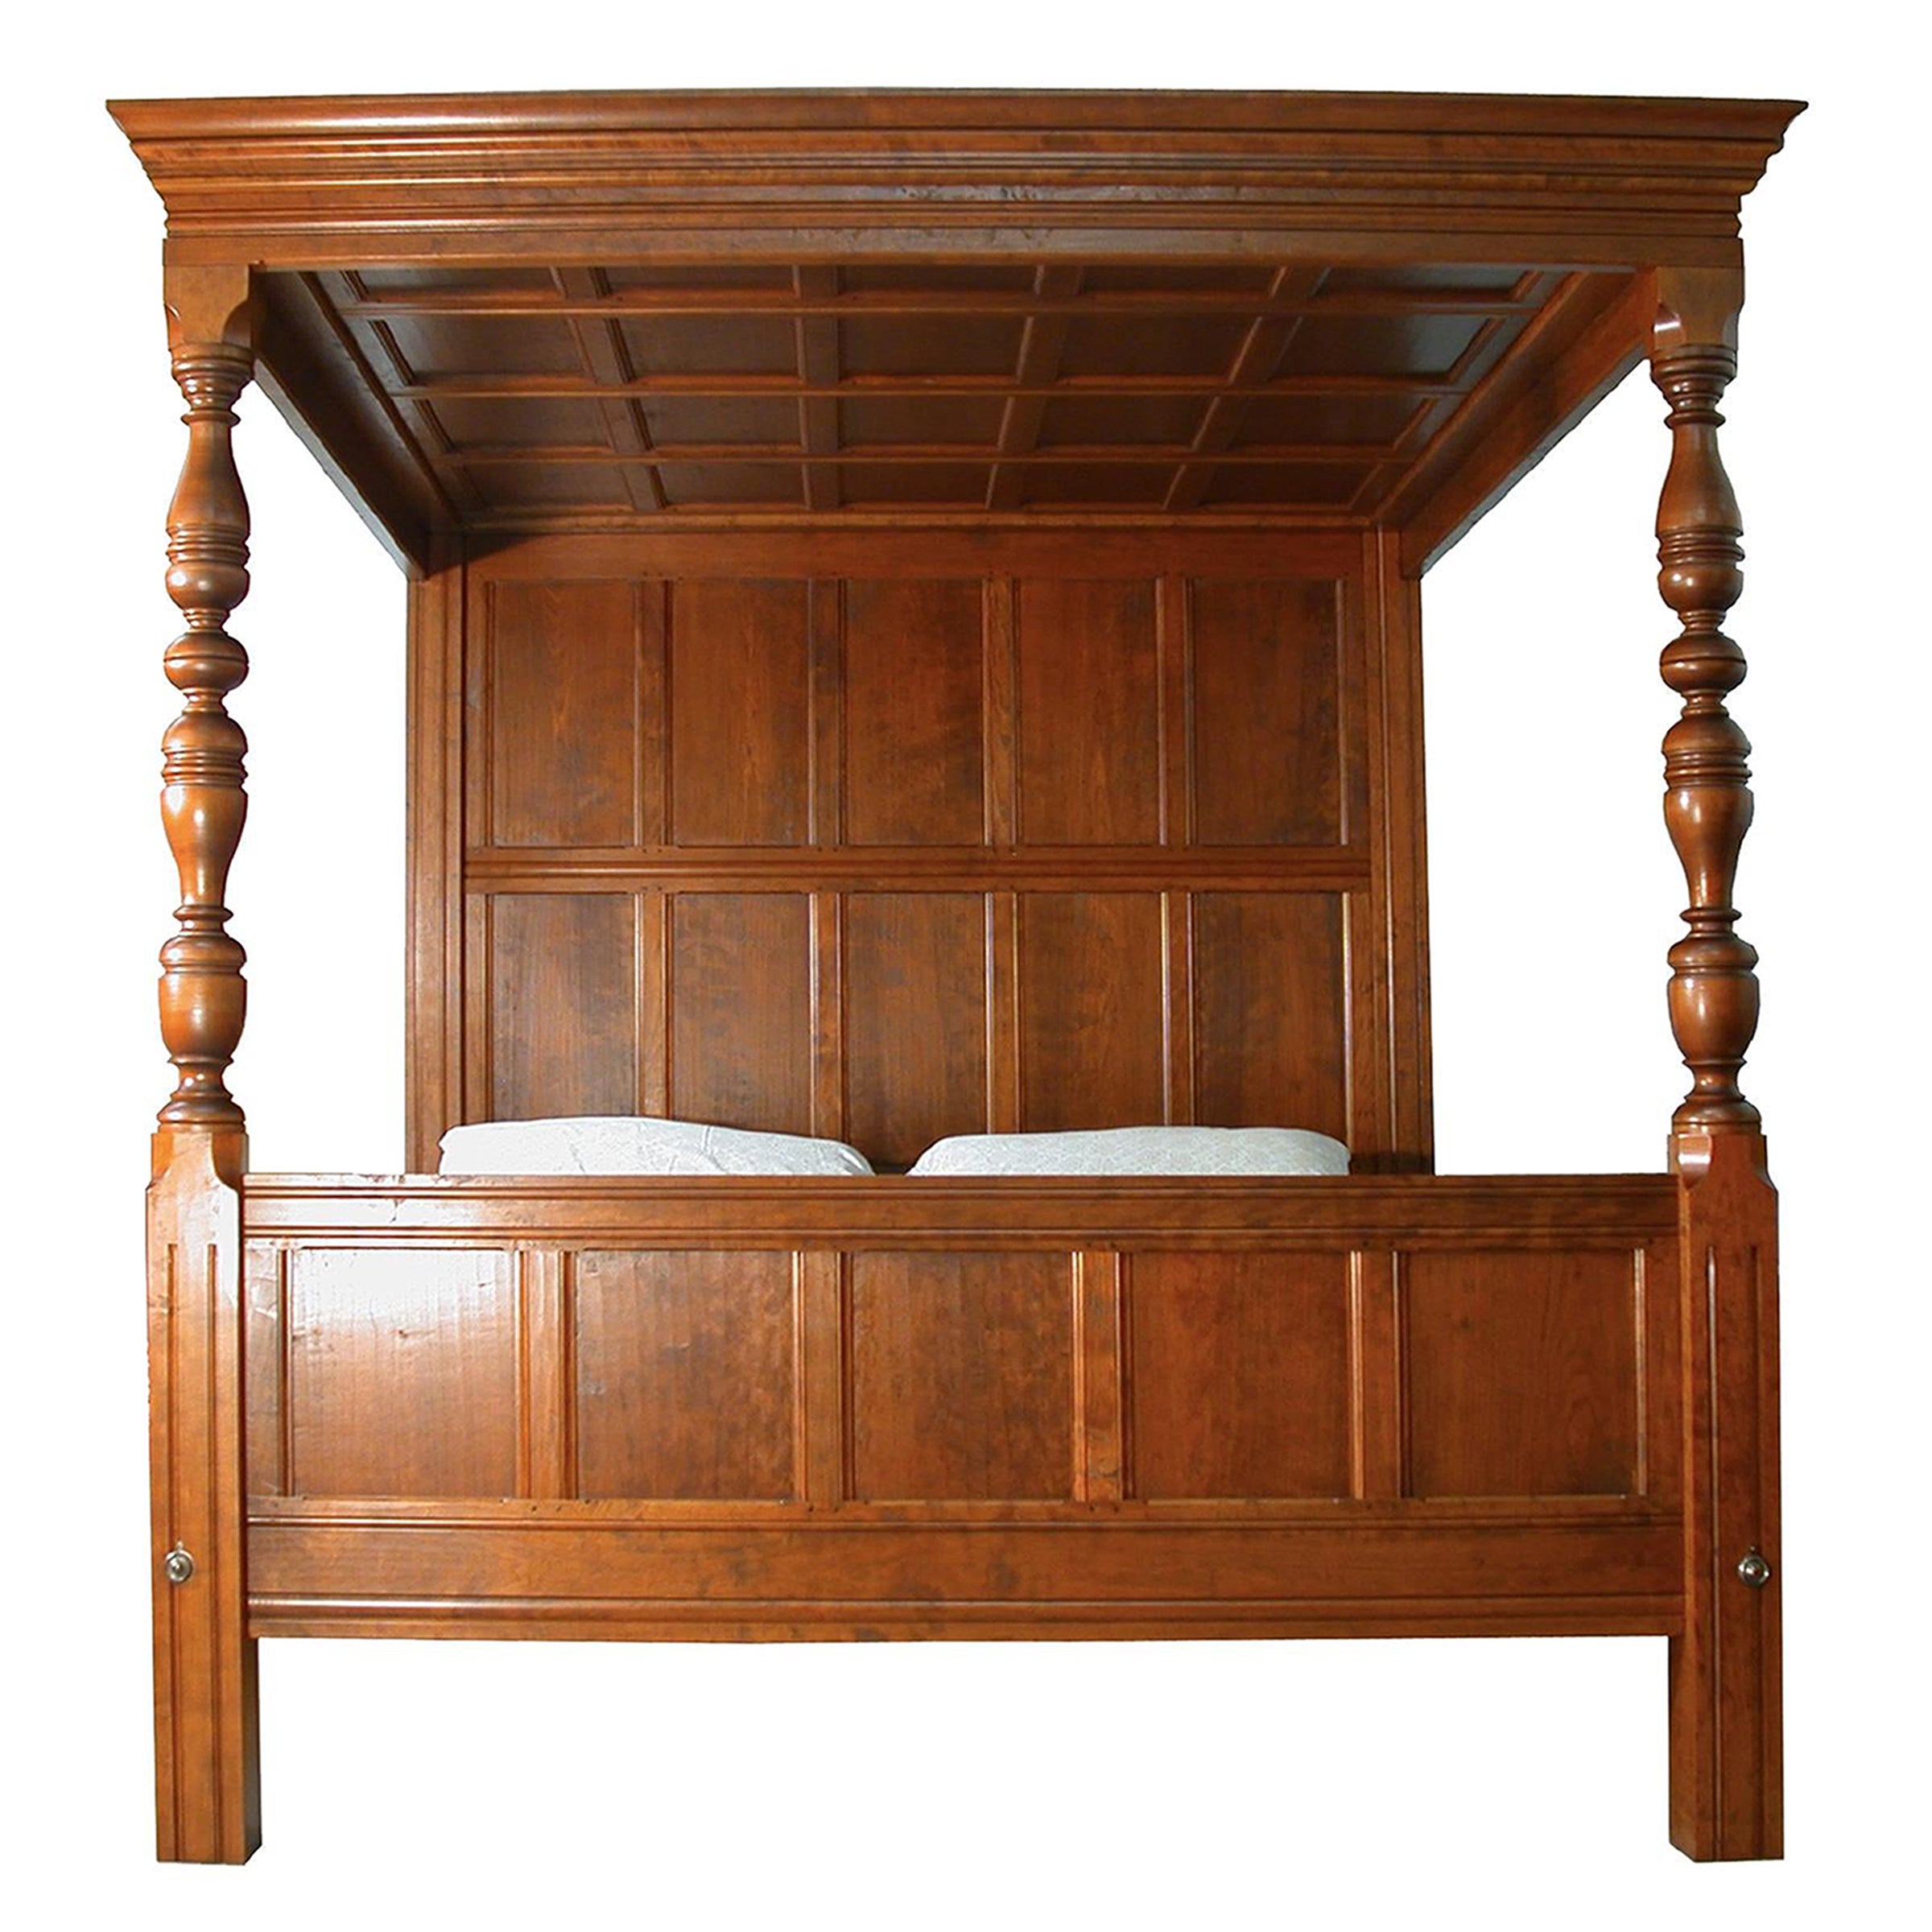 Tudor Bed in Traditional Stained Solid Cherry with Paneled Headboard and Ceiling For Sale